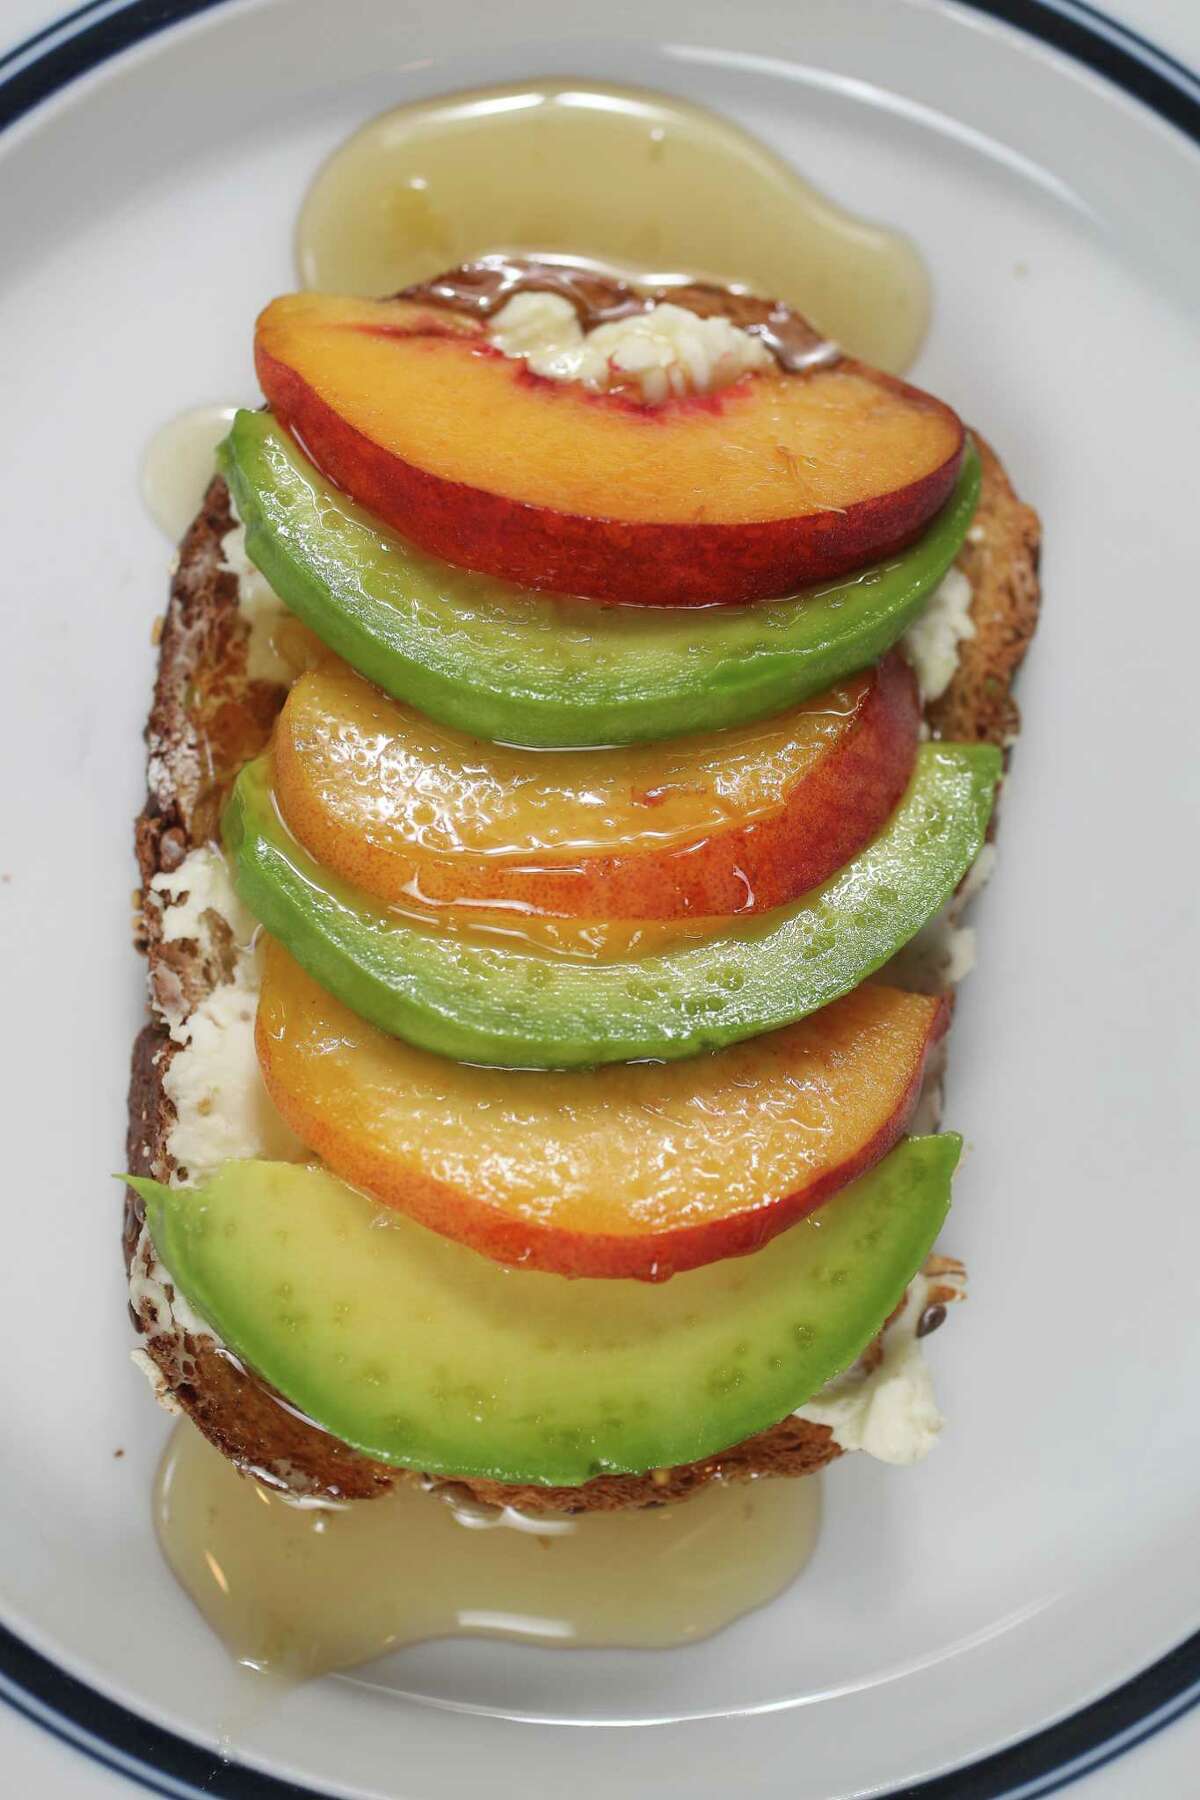 "The 20 Percent Down Payment" is our sweetest avocado toast recipe, topped with honey.